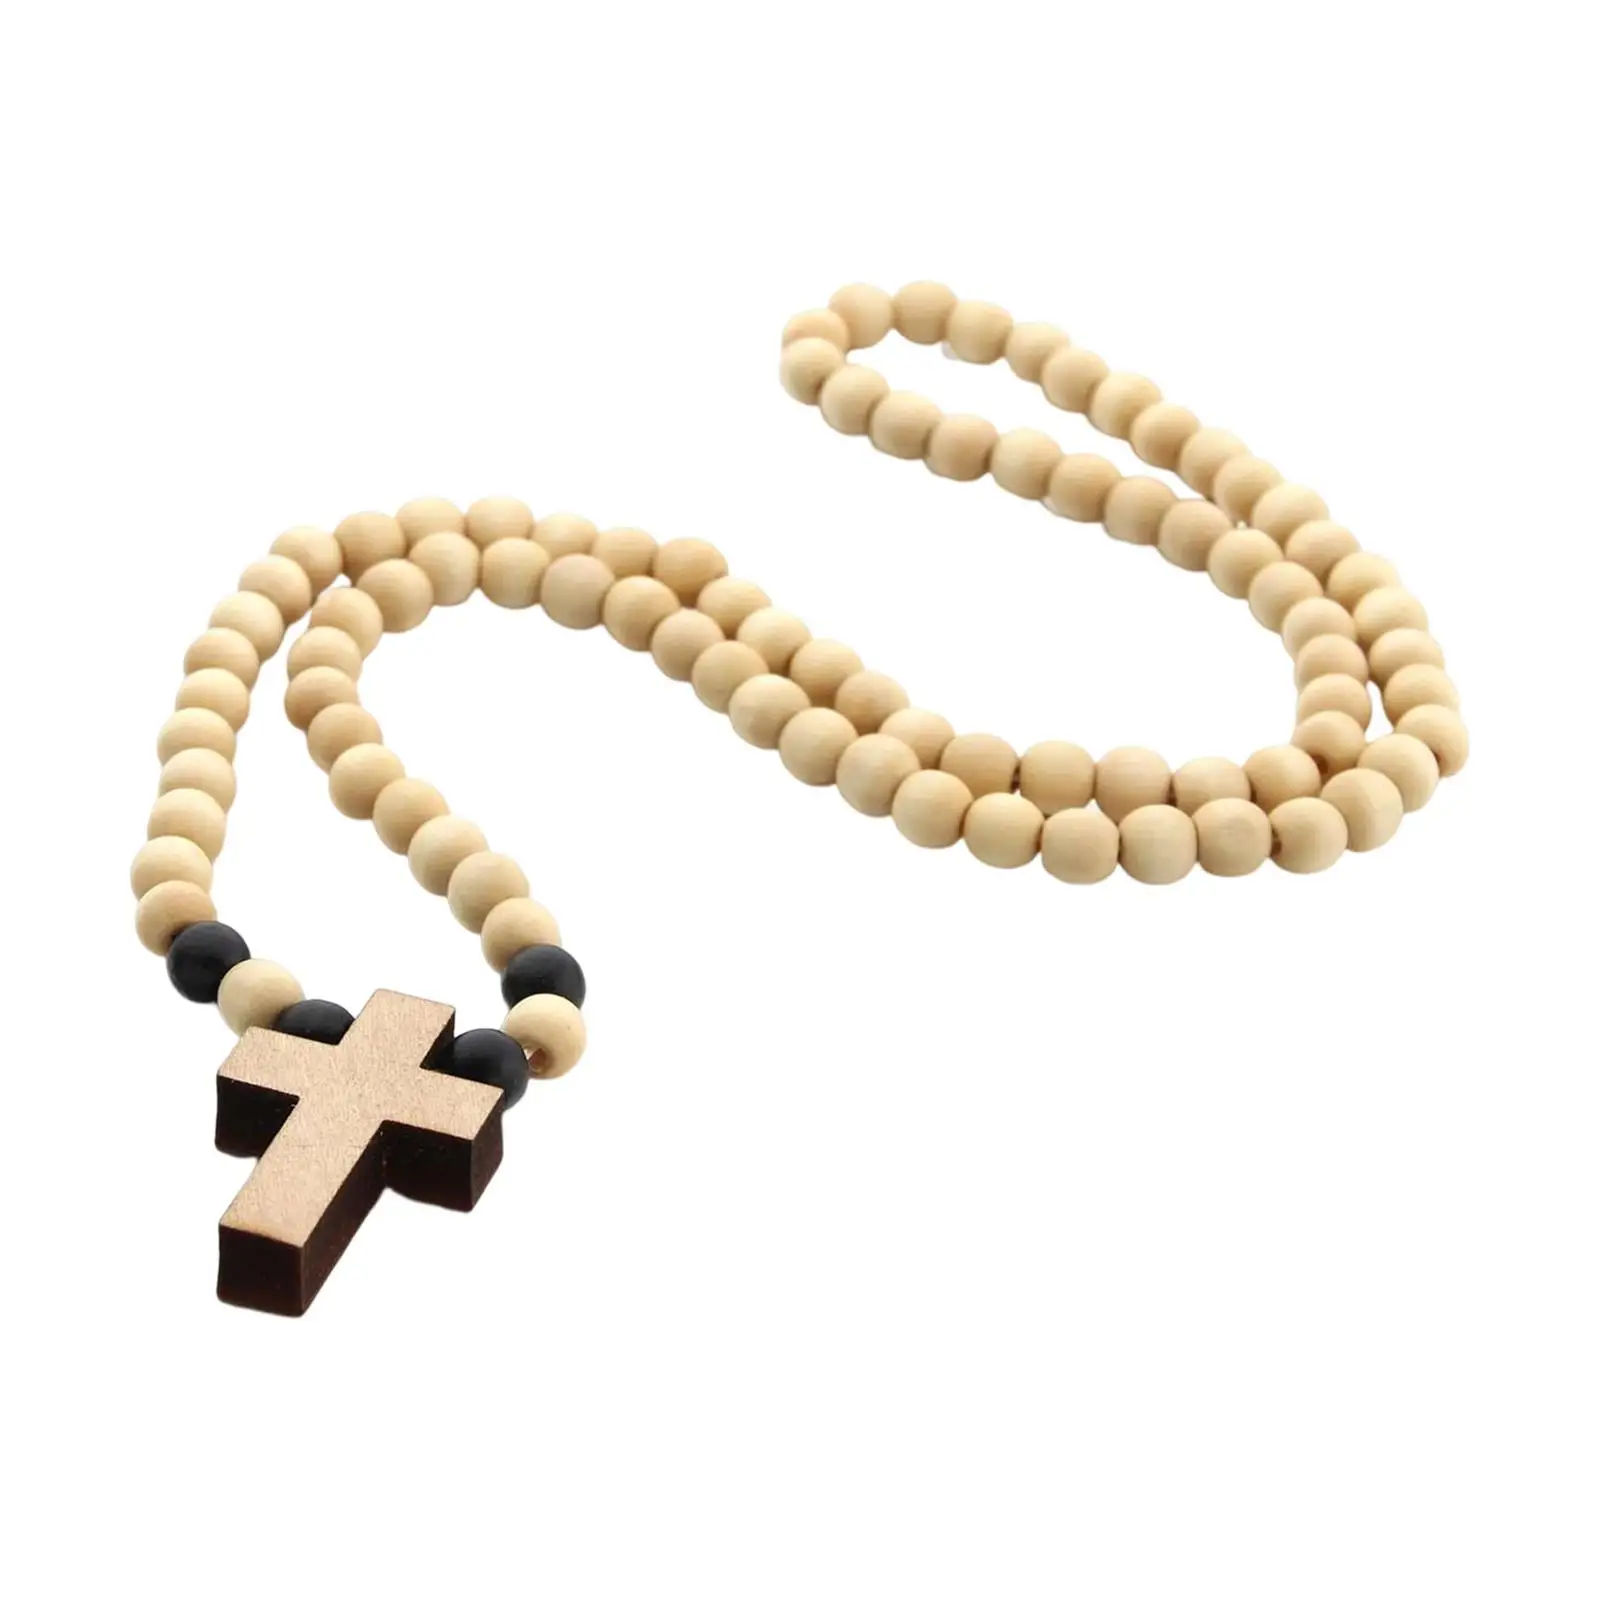 Wooden Beaded Necklace Chain fashion Boys Girls Teens Charms Clothing Accessories Cross Pendant Necklace for Anniversary